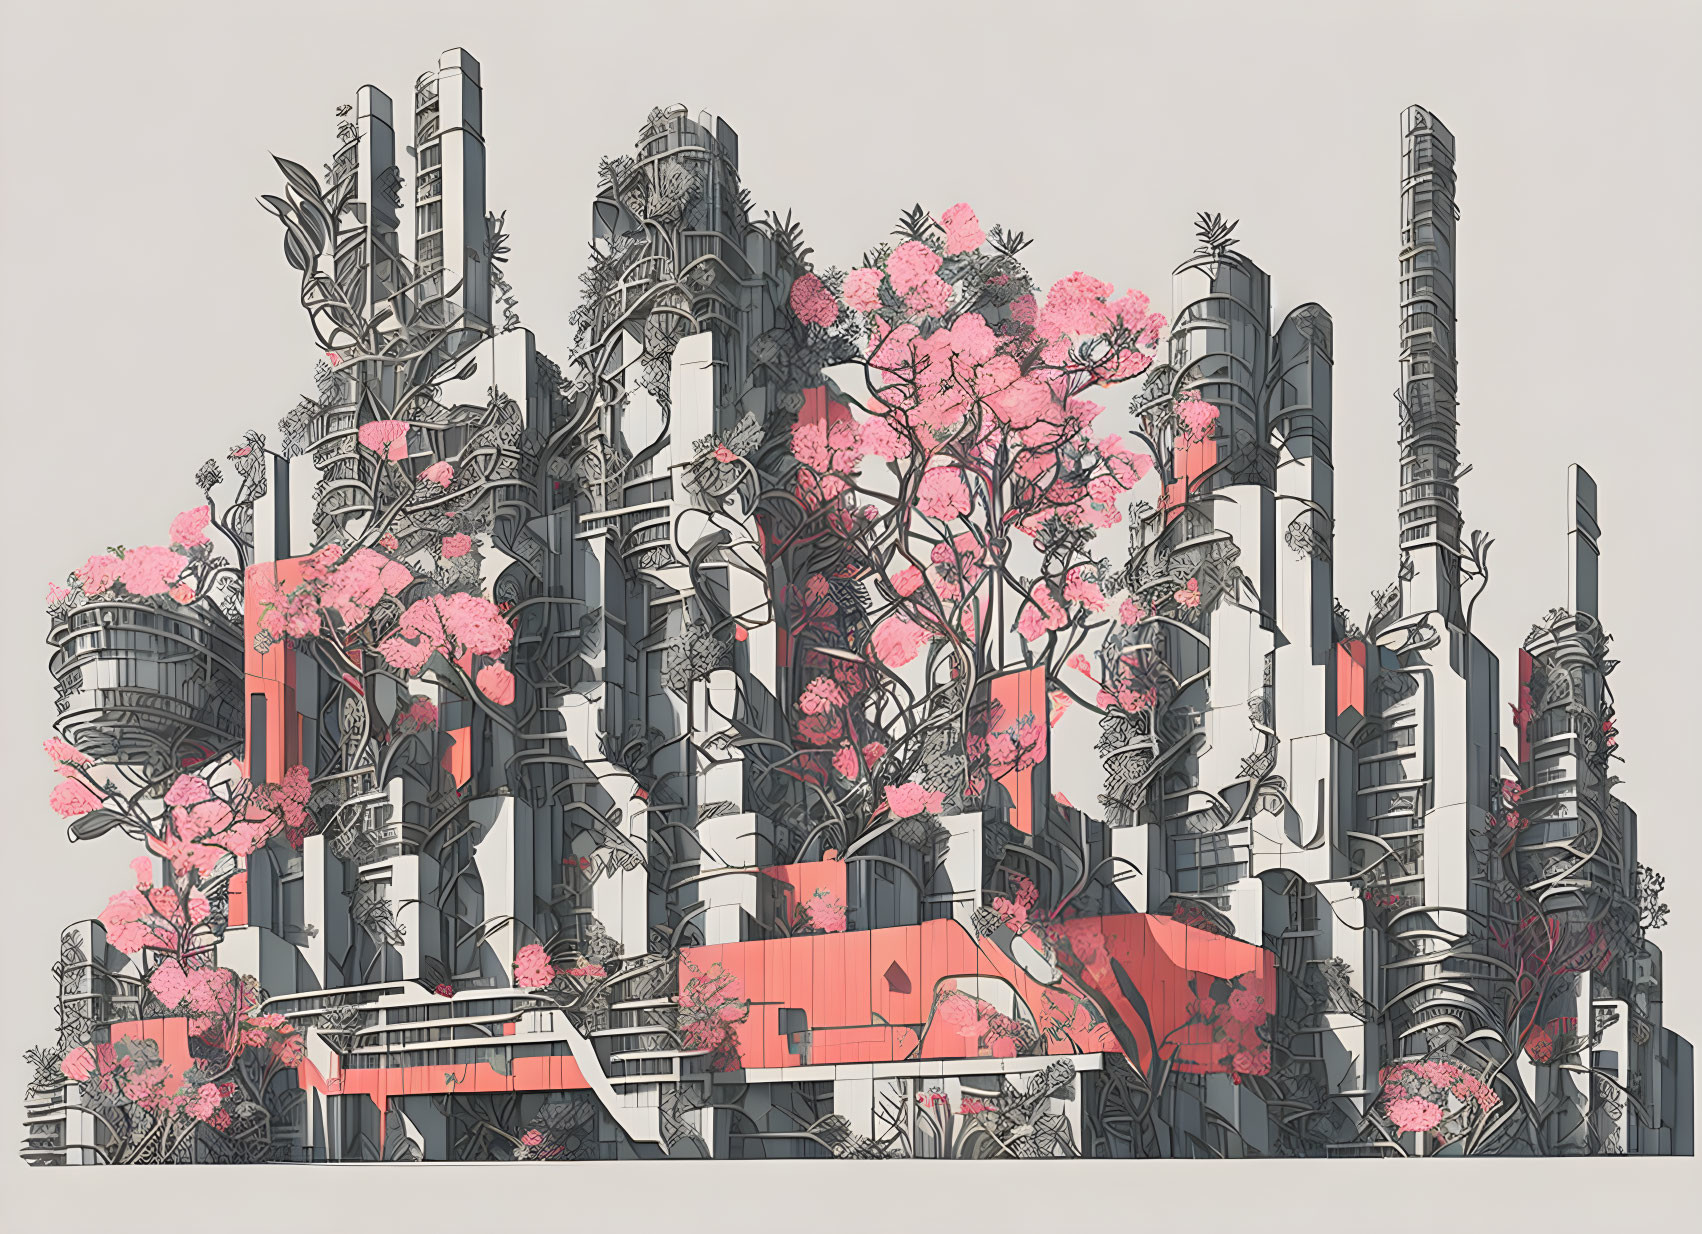 Industrial Landscape with Pink Flowering Trees and Monochrome Factories